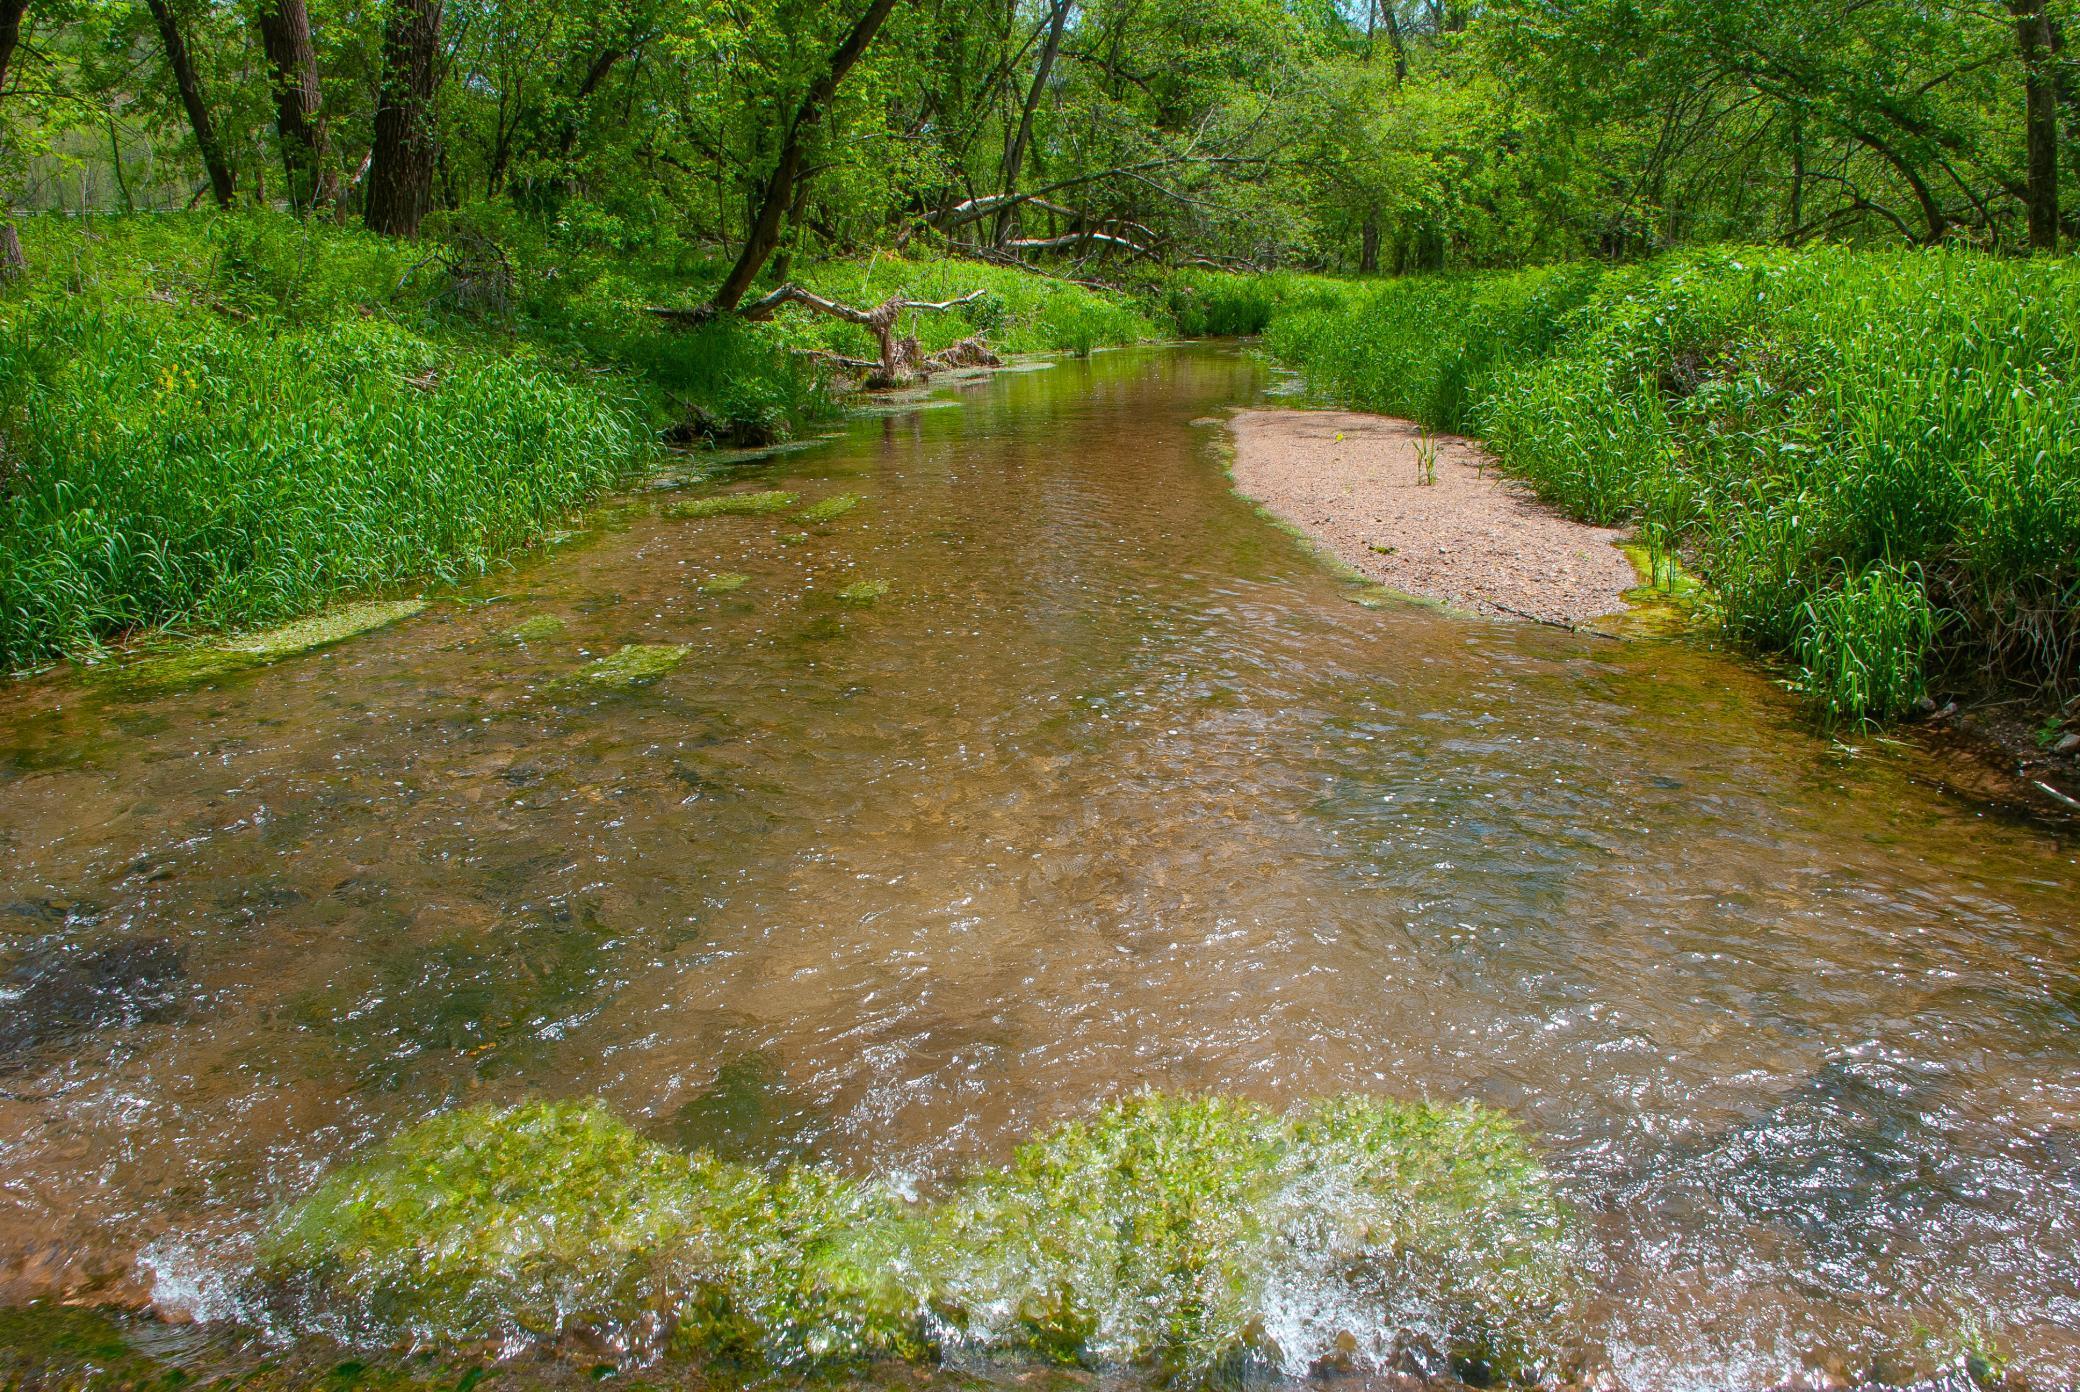 Paradise with private 3/4 mile meandering trout stream and abundant wildlife